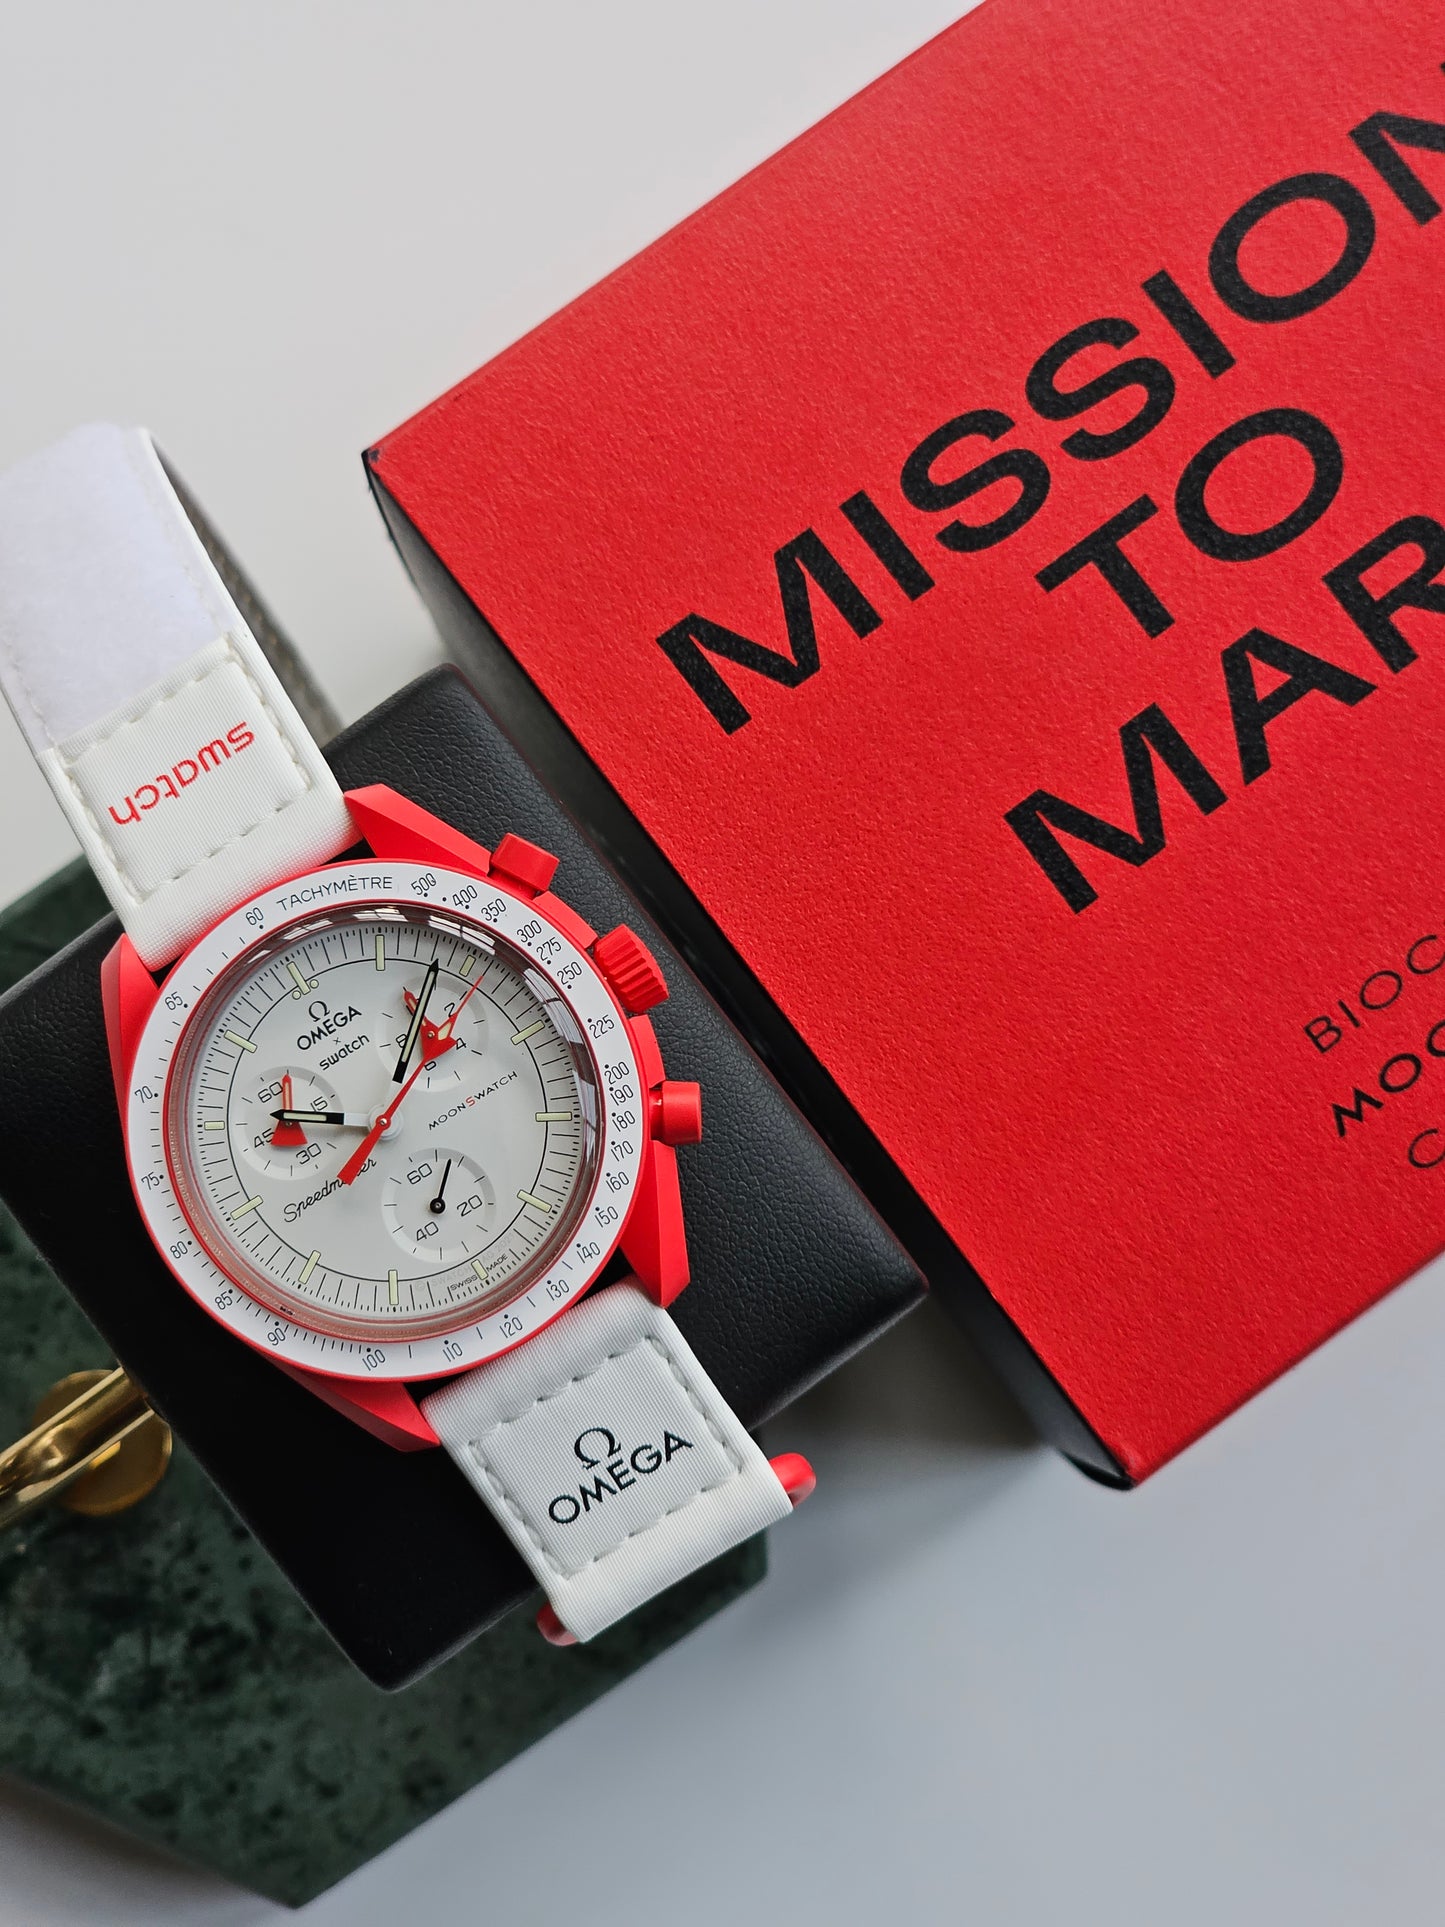 Swatch Moonswatch - Mission to Mars: Redefining Time with Cosmic Inspiration